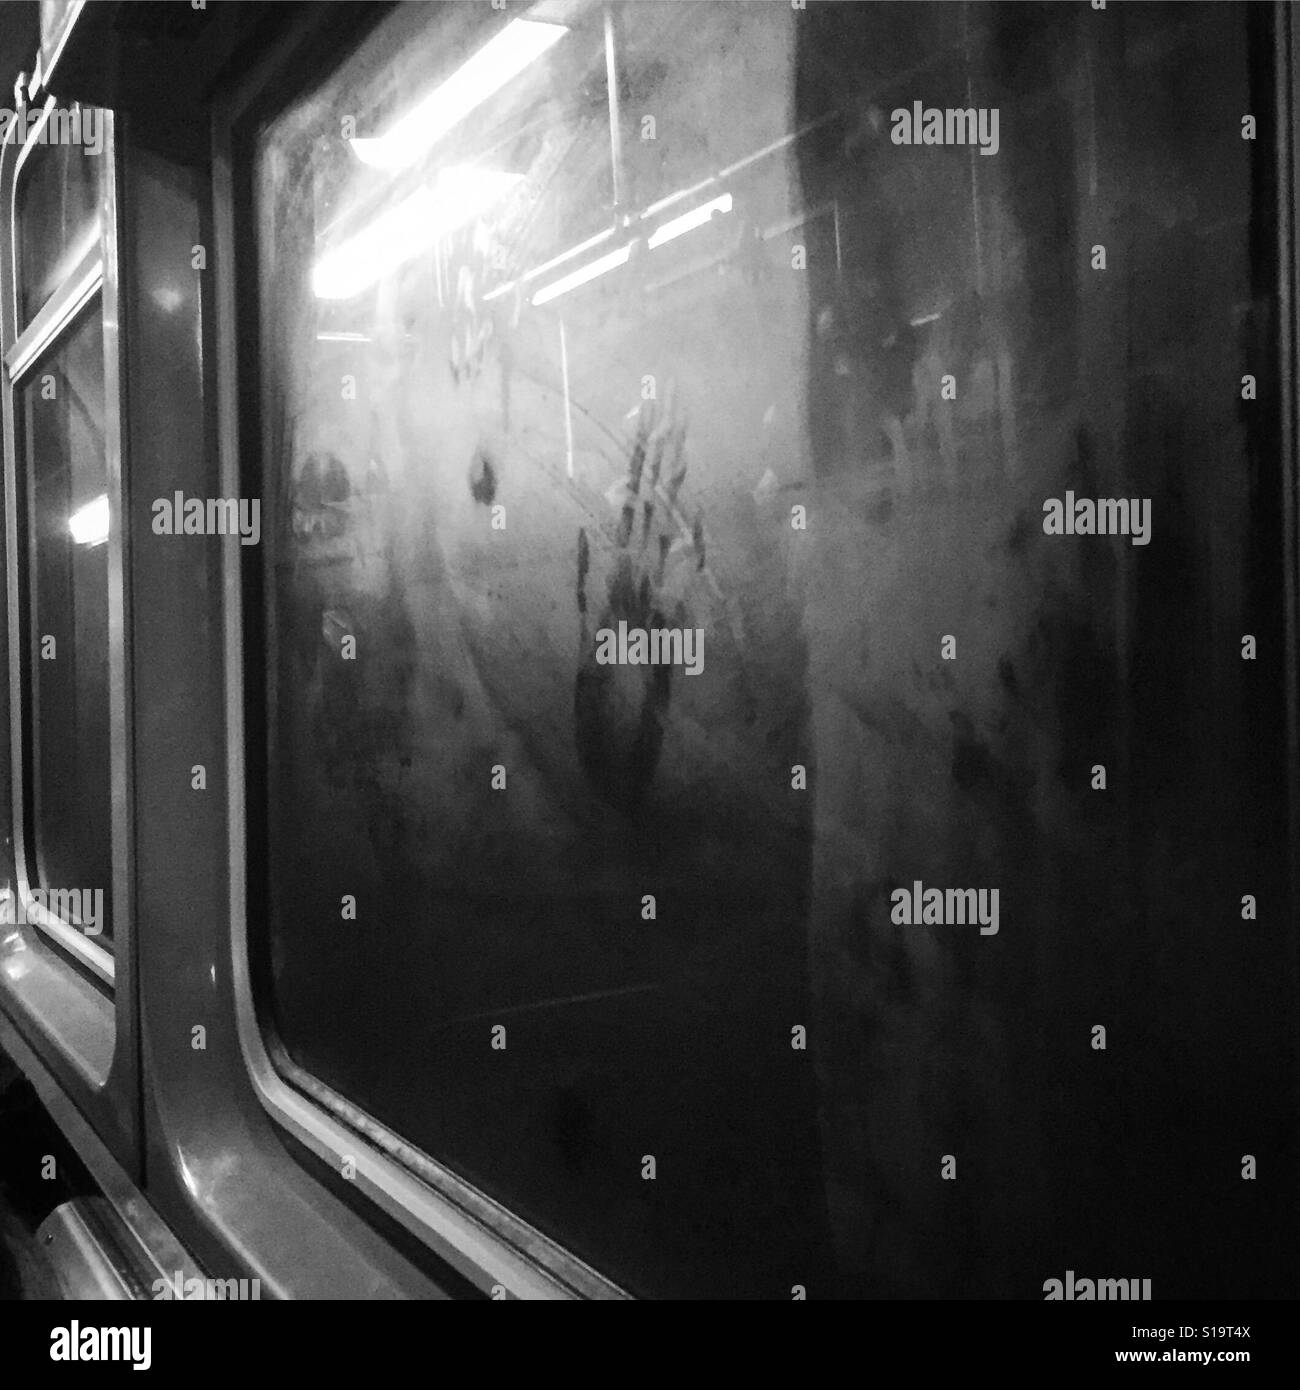 A hand print on the fogged up window of the subway. Stock Photo